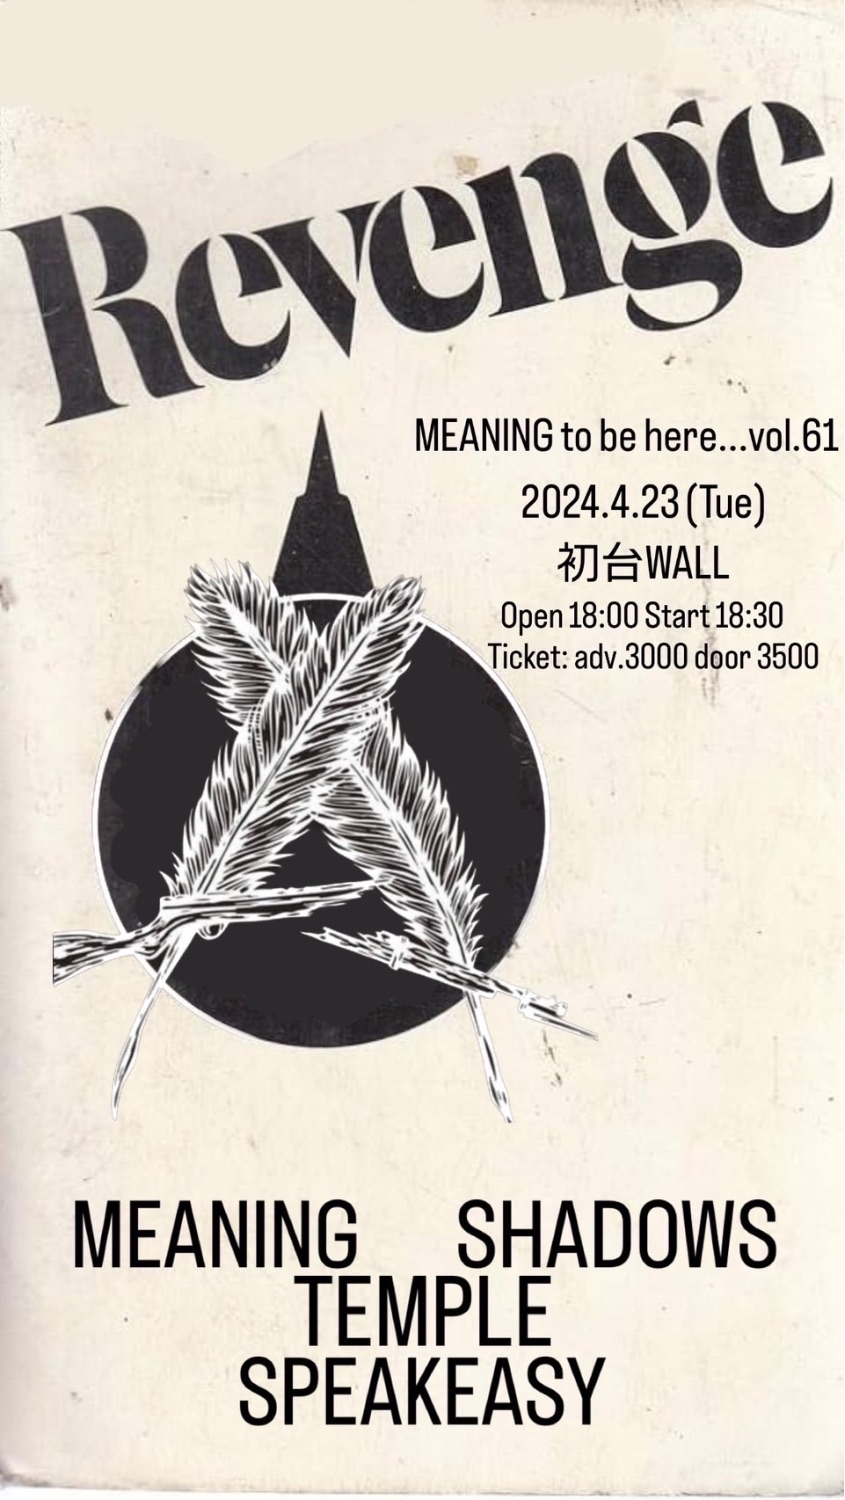 MEANING to be here…vol.61 “Revenge toward myself”